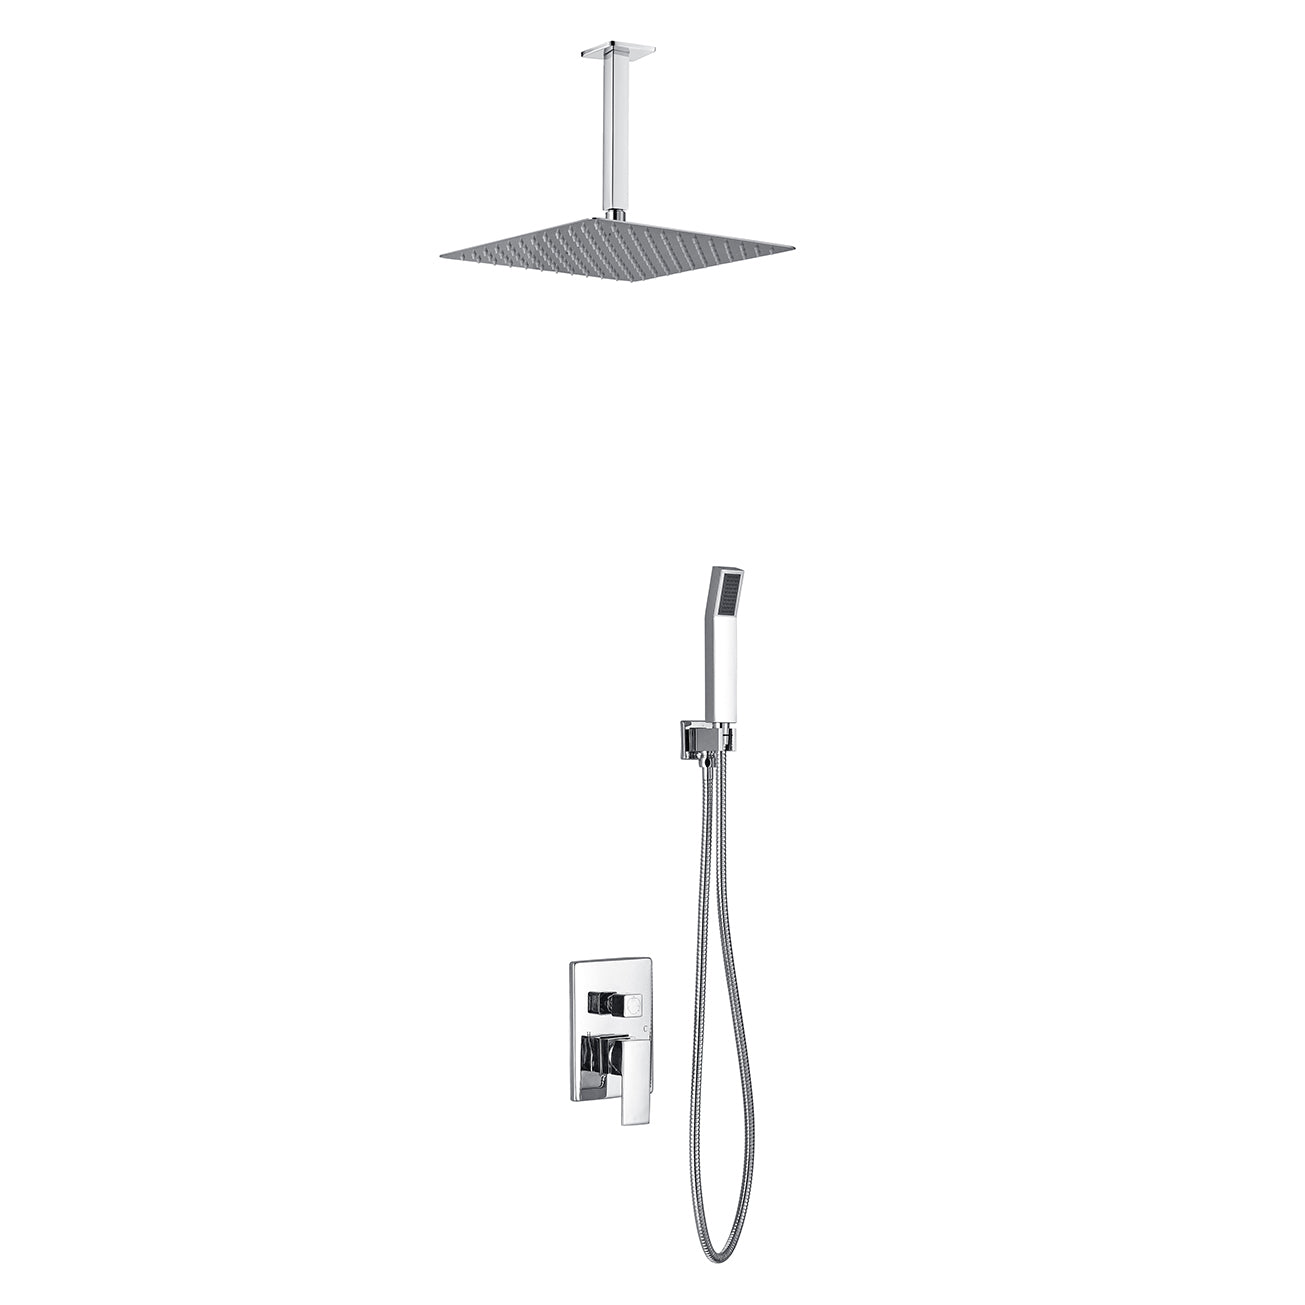 Aqua Piazza Brass Shower Set with Ceiling Mount Square Rain Shower and Handheld - Home and Bath Depot